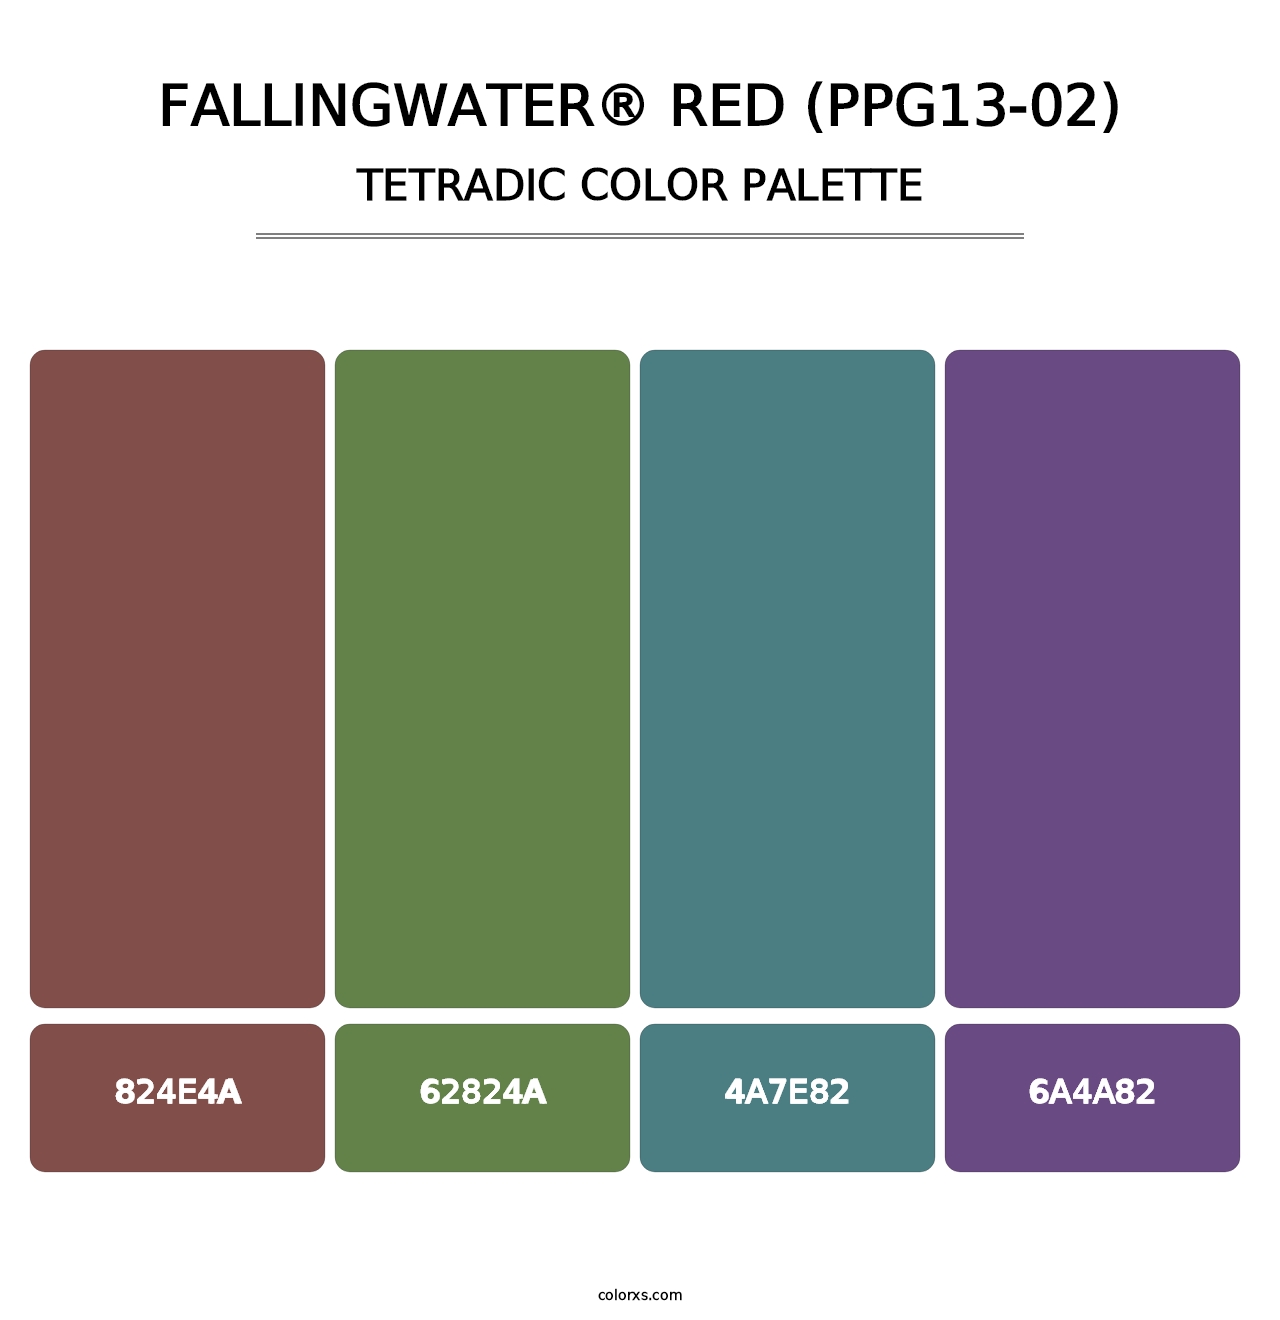 Fallingwater® Red (PPG13-02) - Tetradic Color Palette